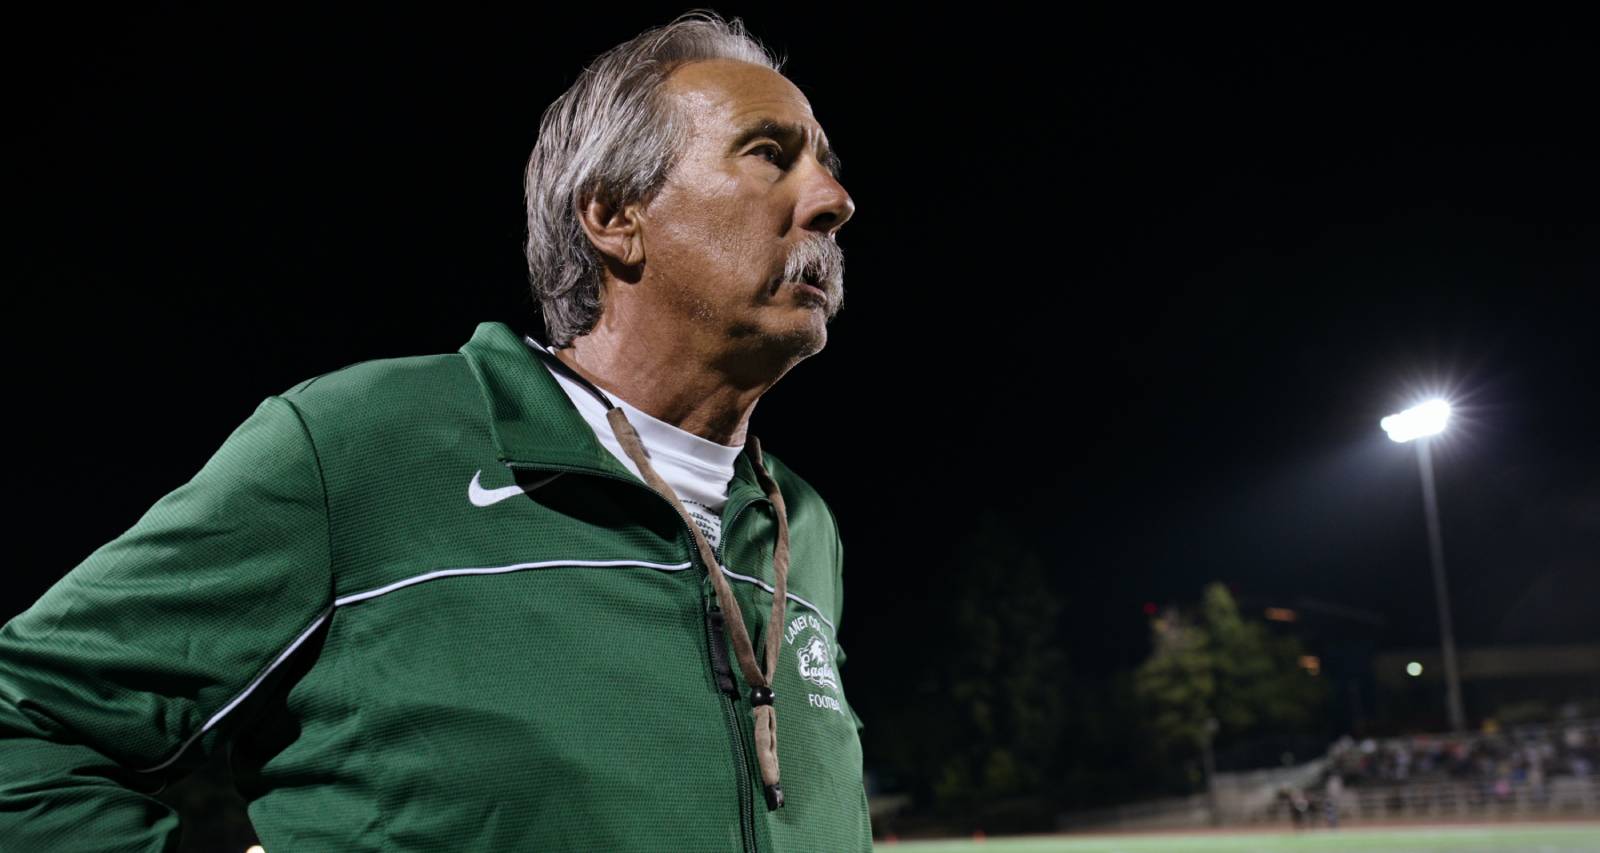 Coach John Beam Wiki, Age, Family, Education, Career and Facts About the Laney College Head Coach on “Last Chance U”